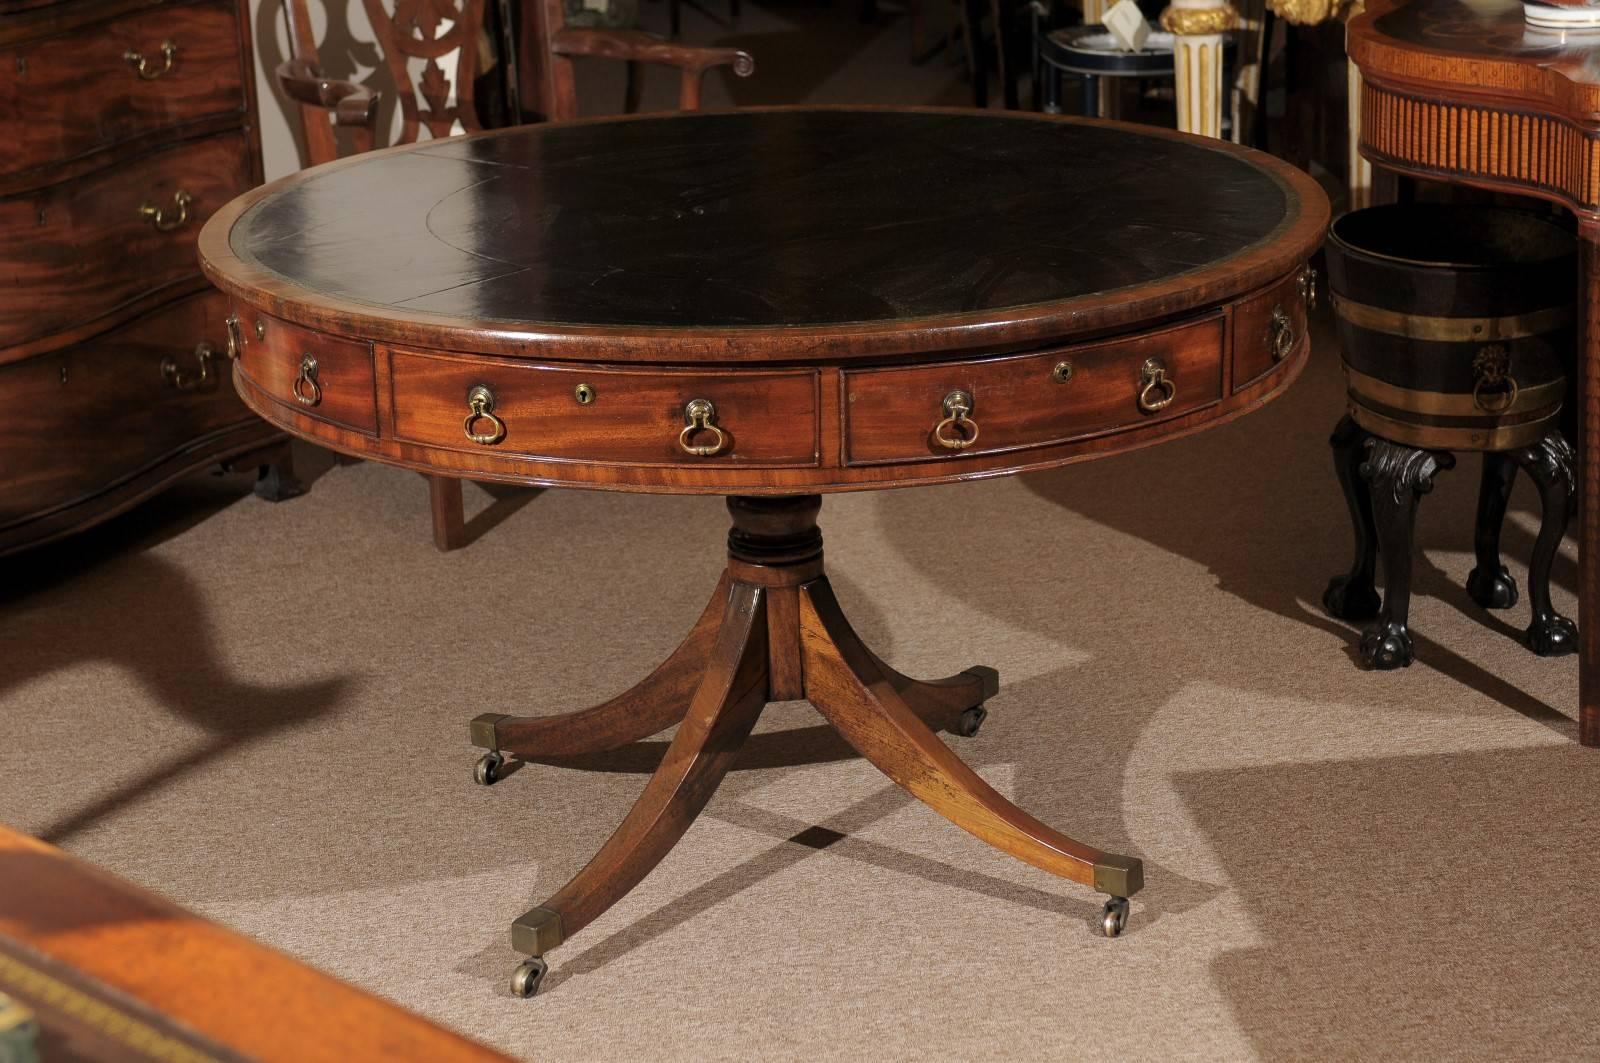 19th century English mahogany rent table with dark green leather top and four sliding drawers.

